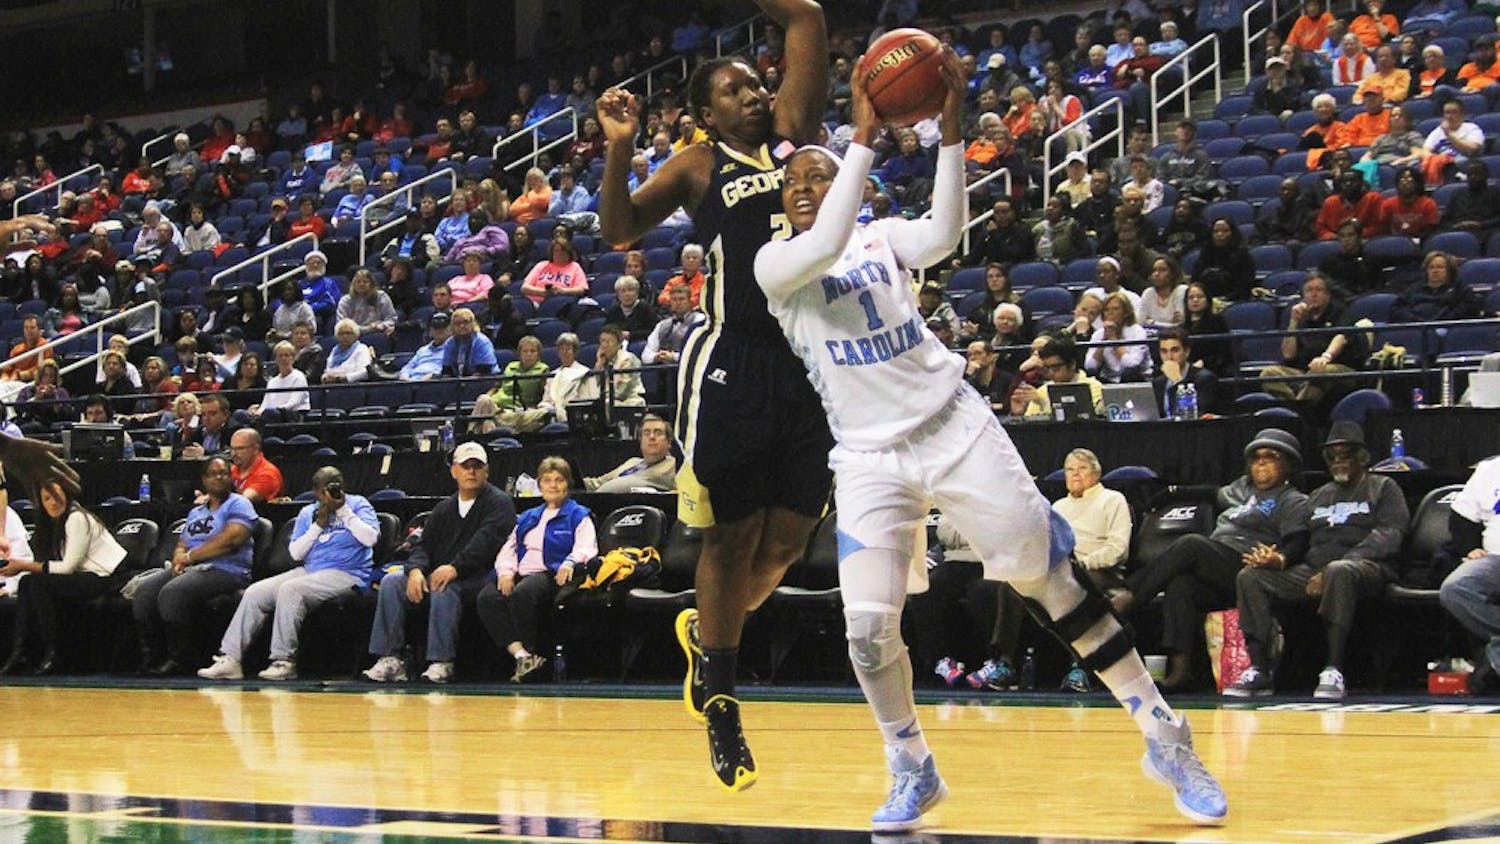 Sophomore forward Stephanie Mavunga looks for an open shot in the game against Georgia Tech in the second round of the women’s ACC Tournament in the Greensboro Coliseum on Thursday evening.